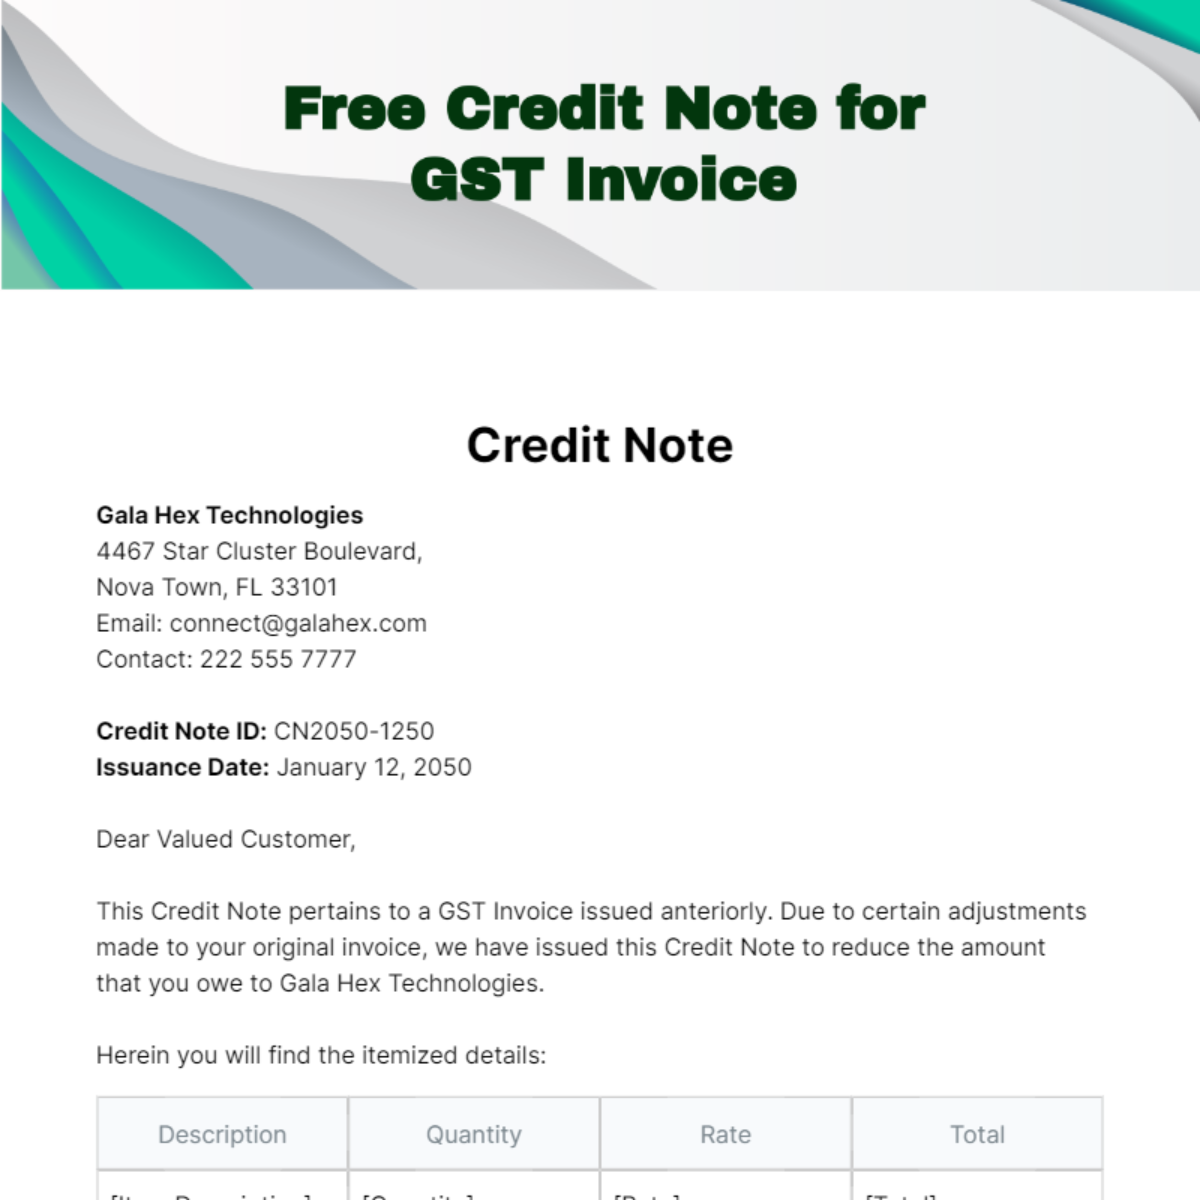 Free Credit Note for GST Invoice Template